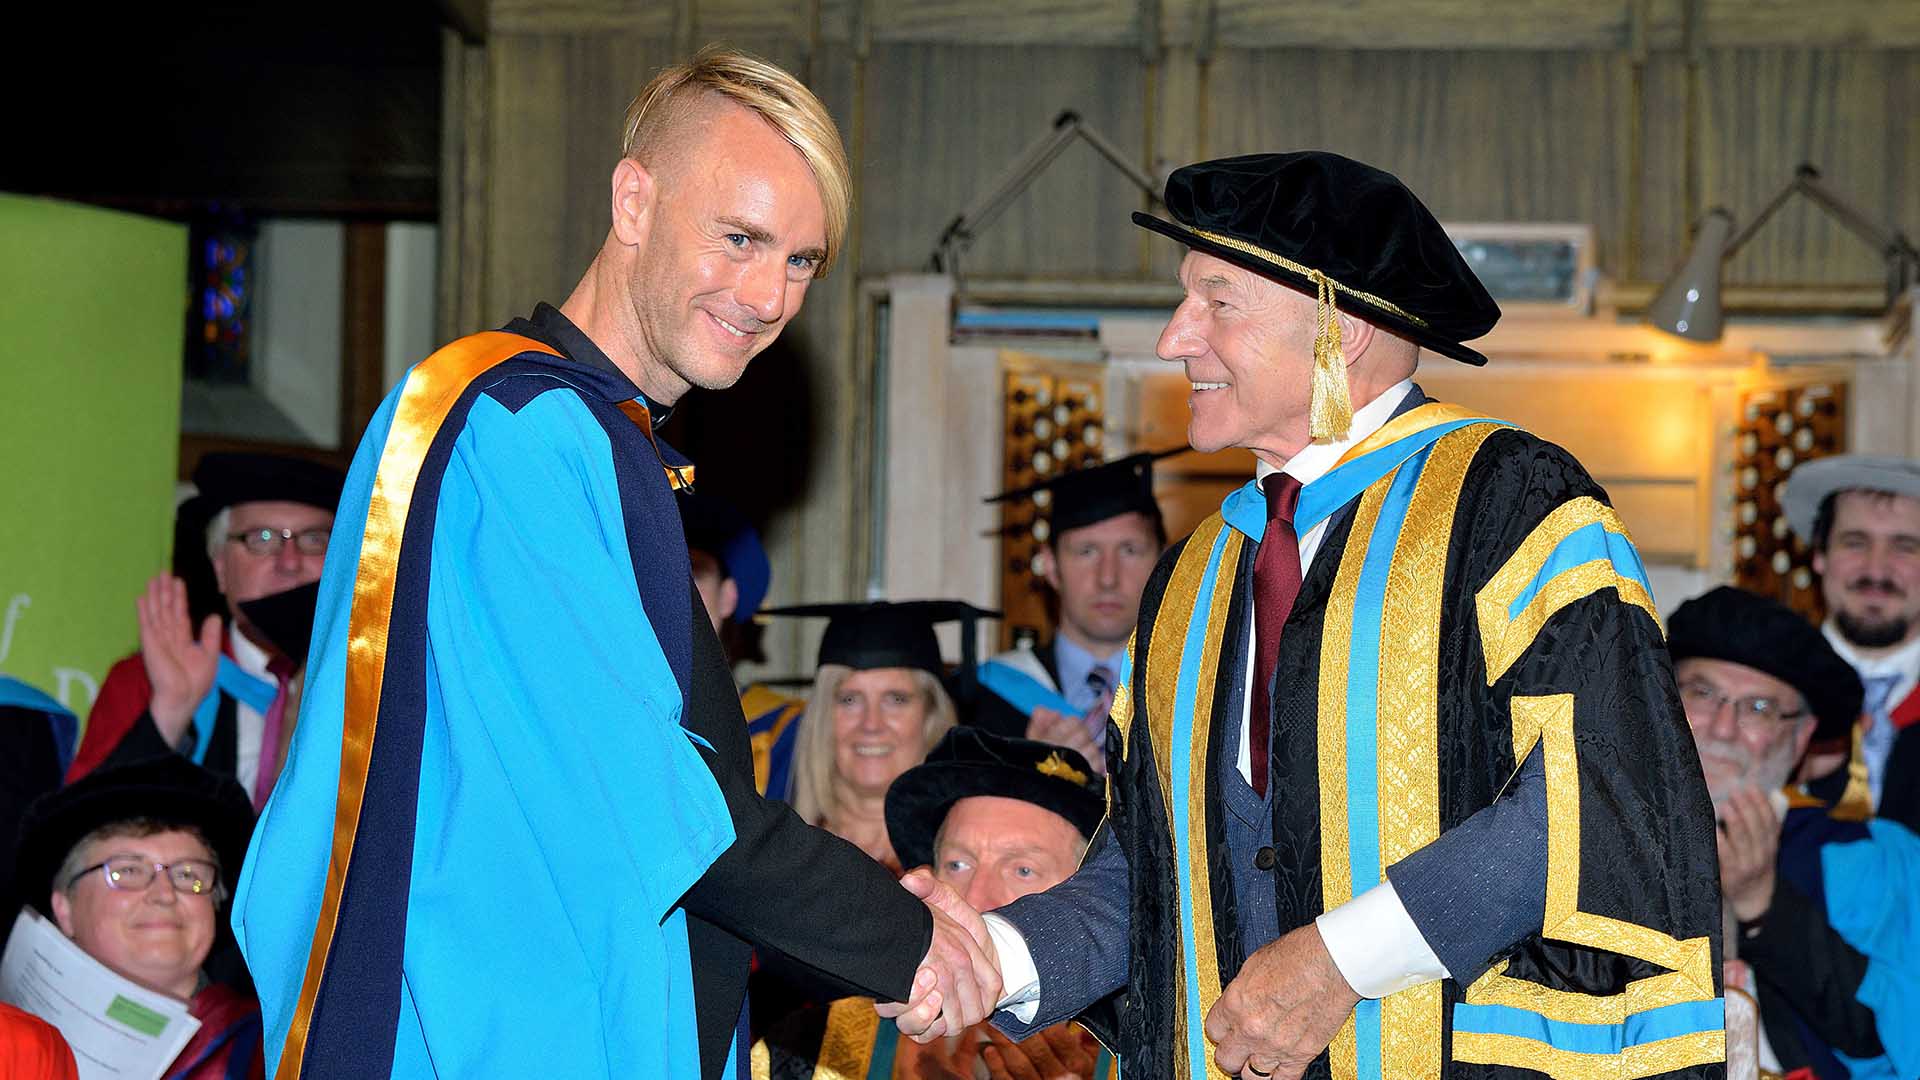 Richie Hawtin shakes hands with Sir Patrick Stewart while wearing honorary graduation garb